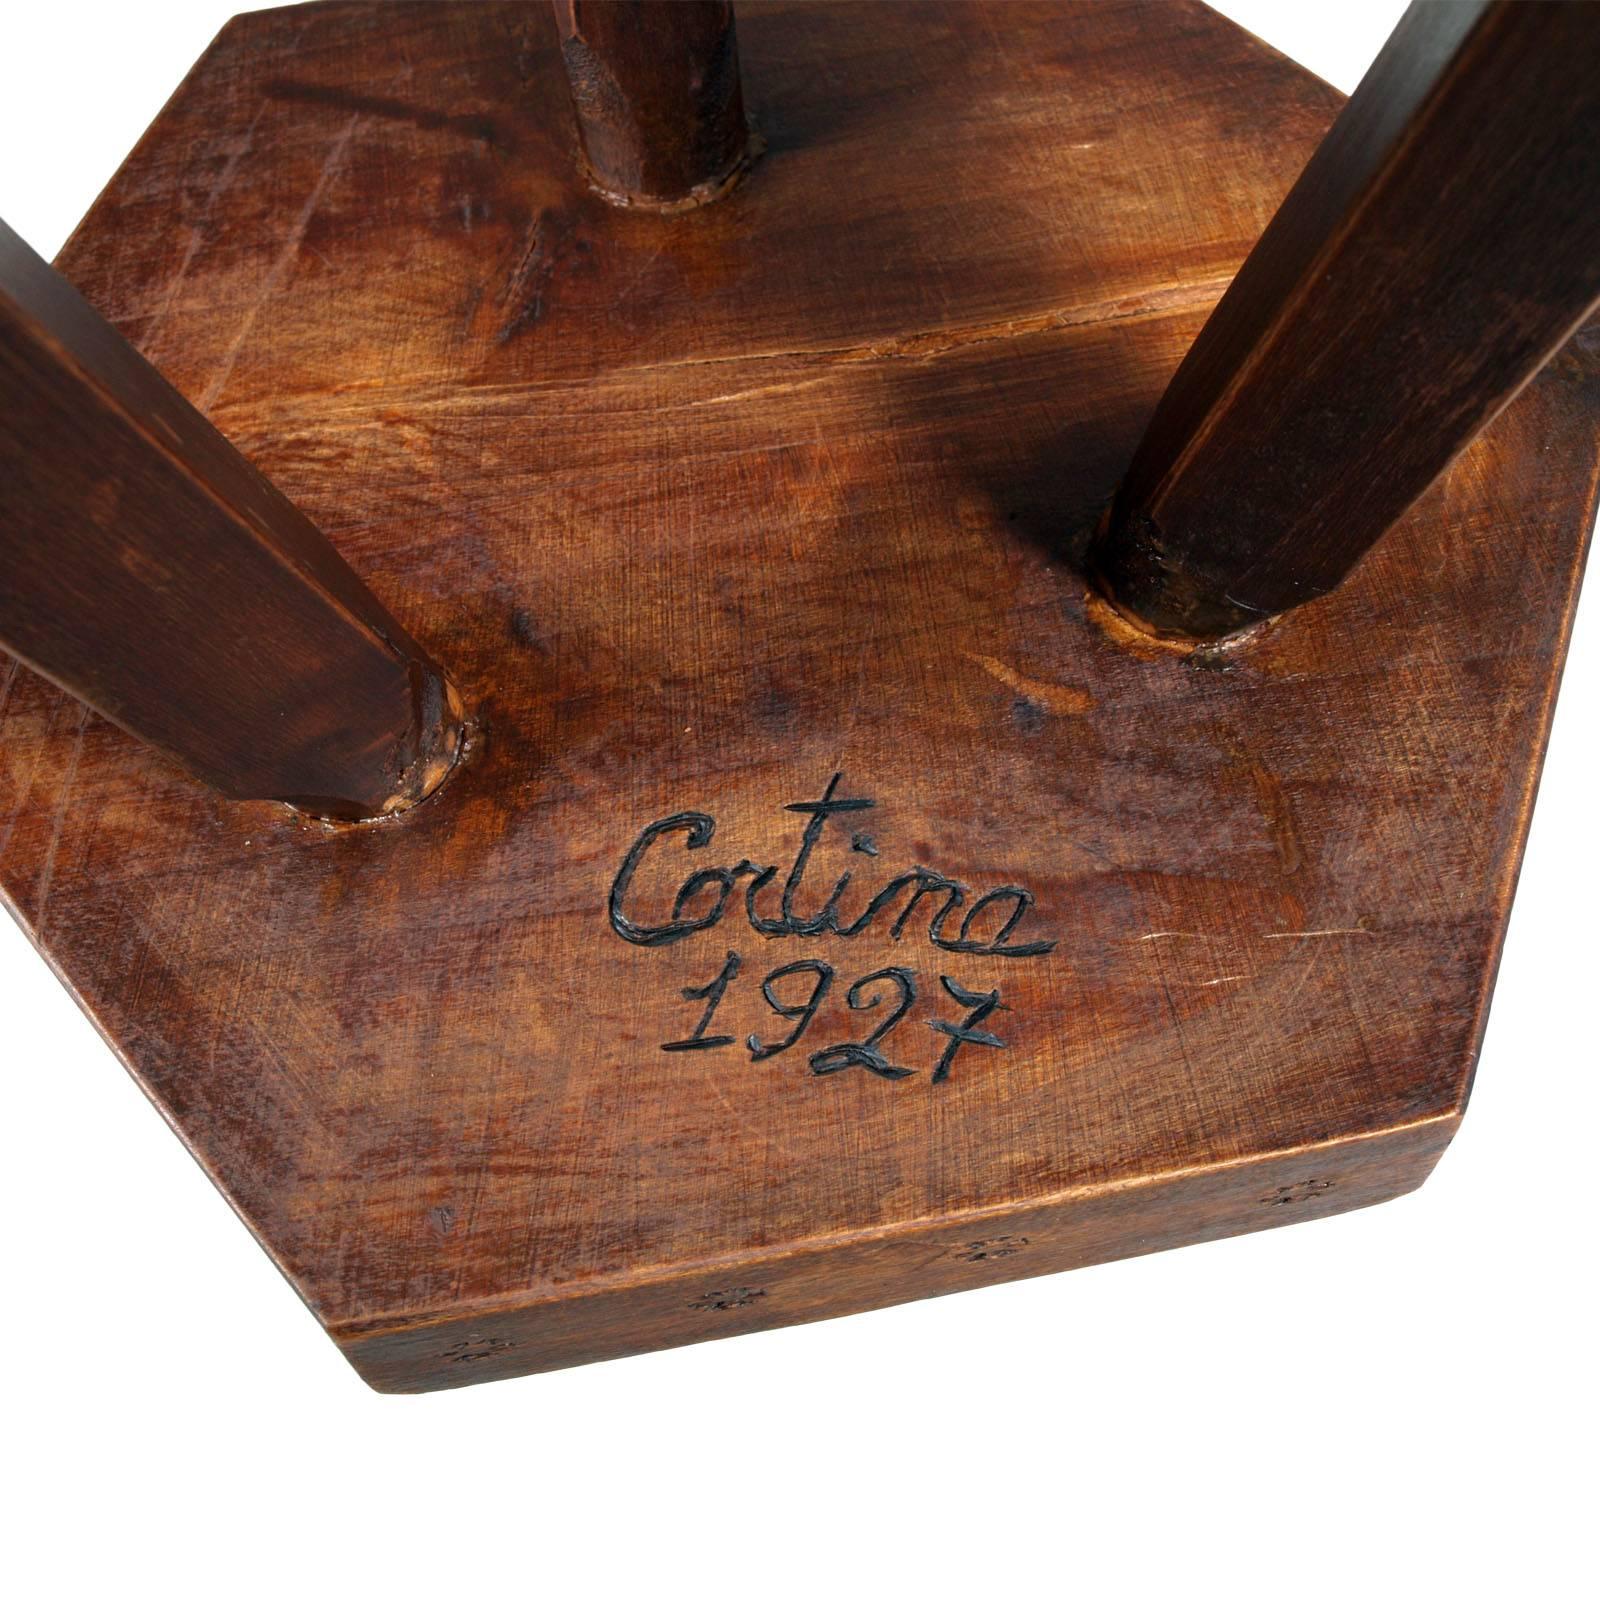 20th Century Italian 1927 characteristic Country Stool from Cortina, widely Hand-Carved Wood